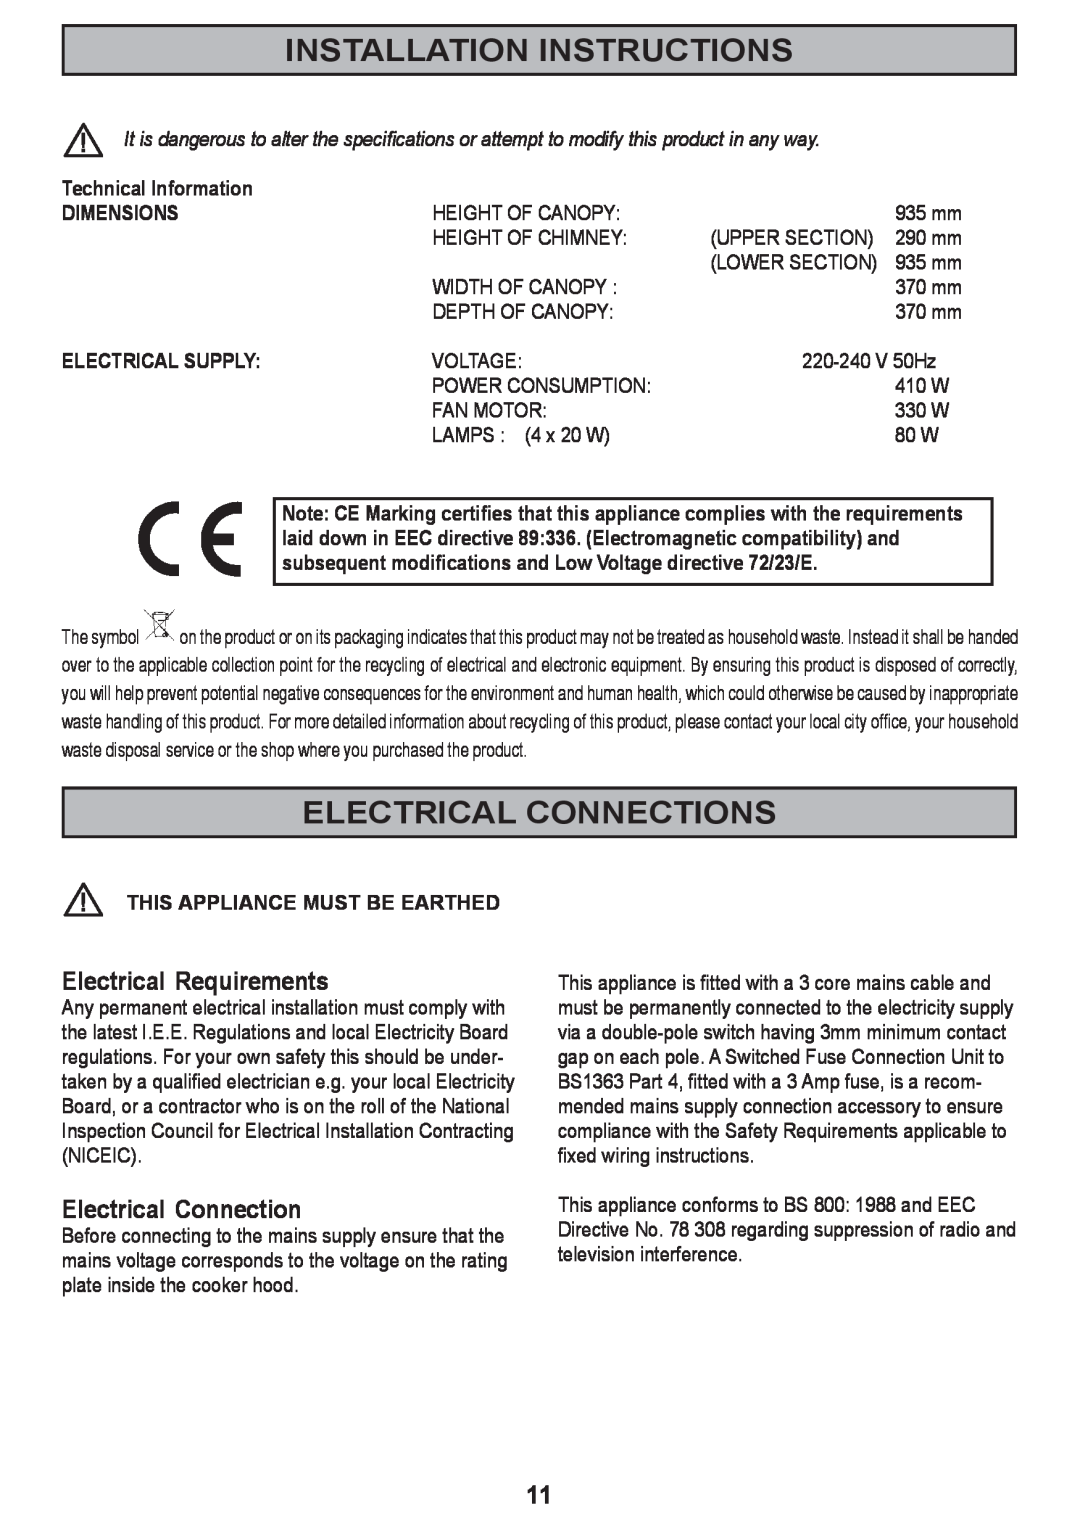 Zanussi ZHC 590 manual Installation Instructions, Electrical Connections, Electrical Requirements 